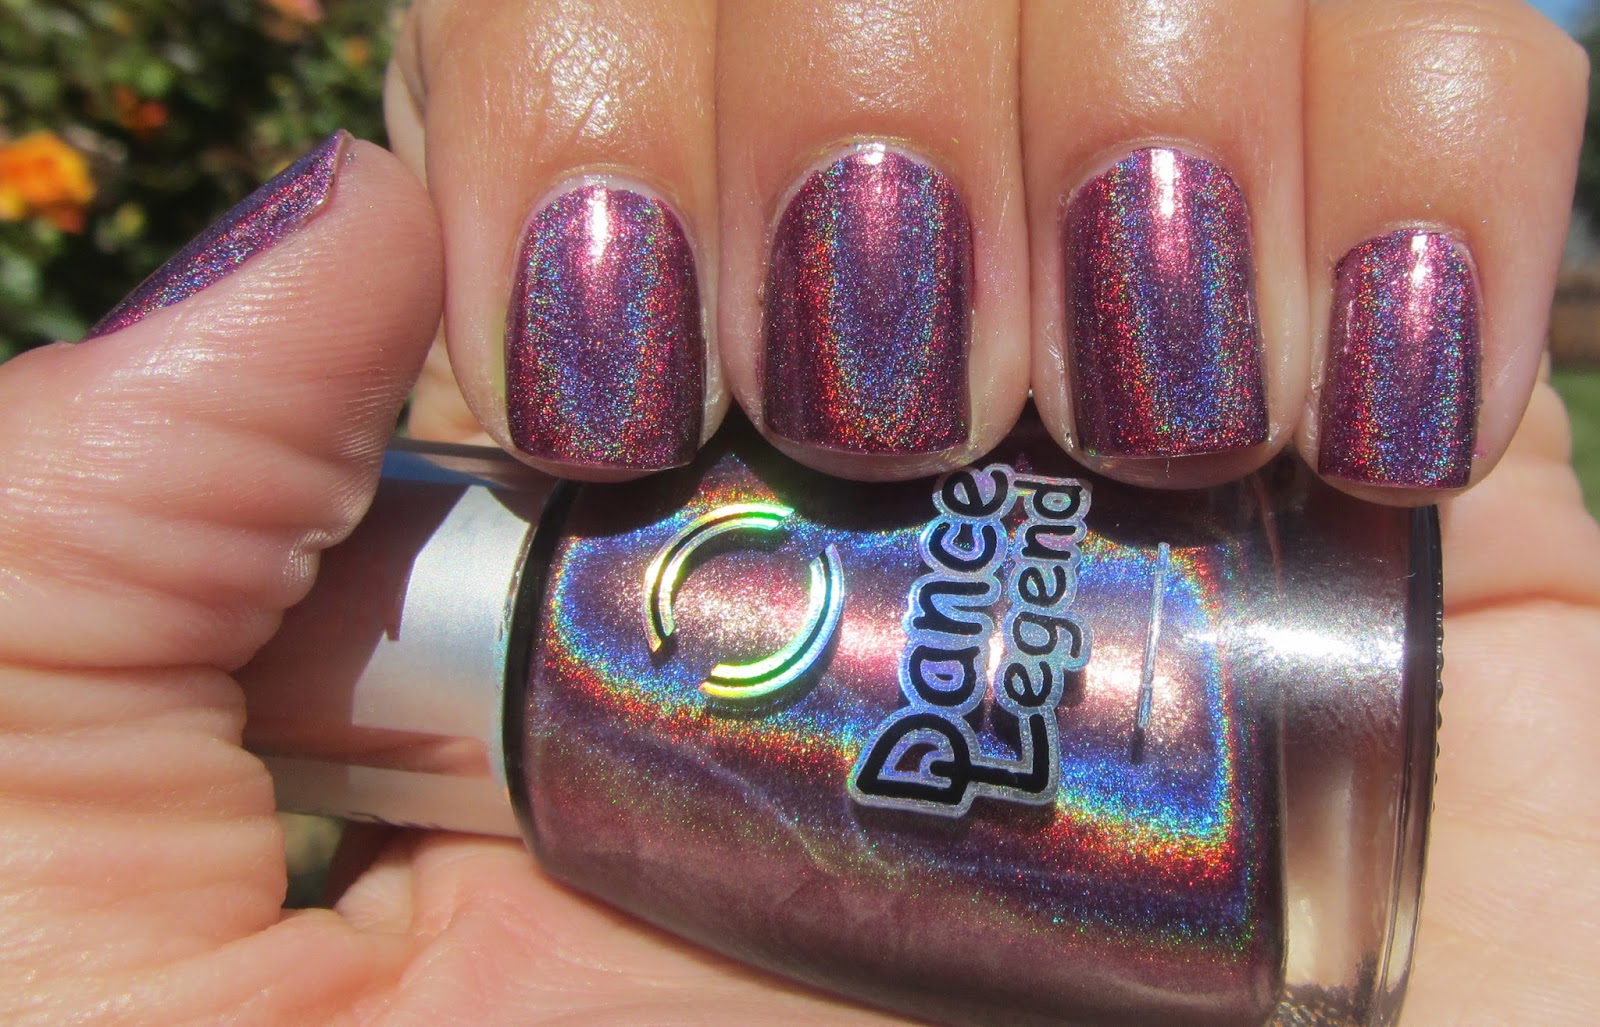 1. OPI Nail Lacquer in "Optical Illusion" - wide 4